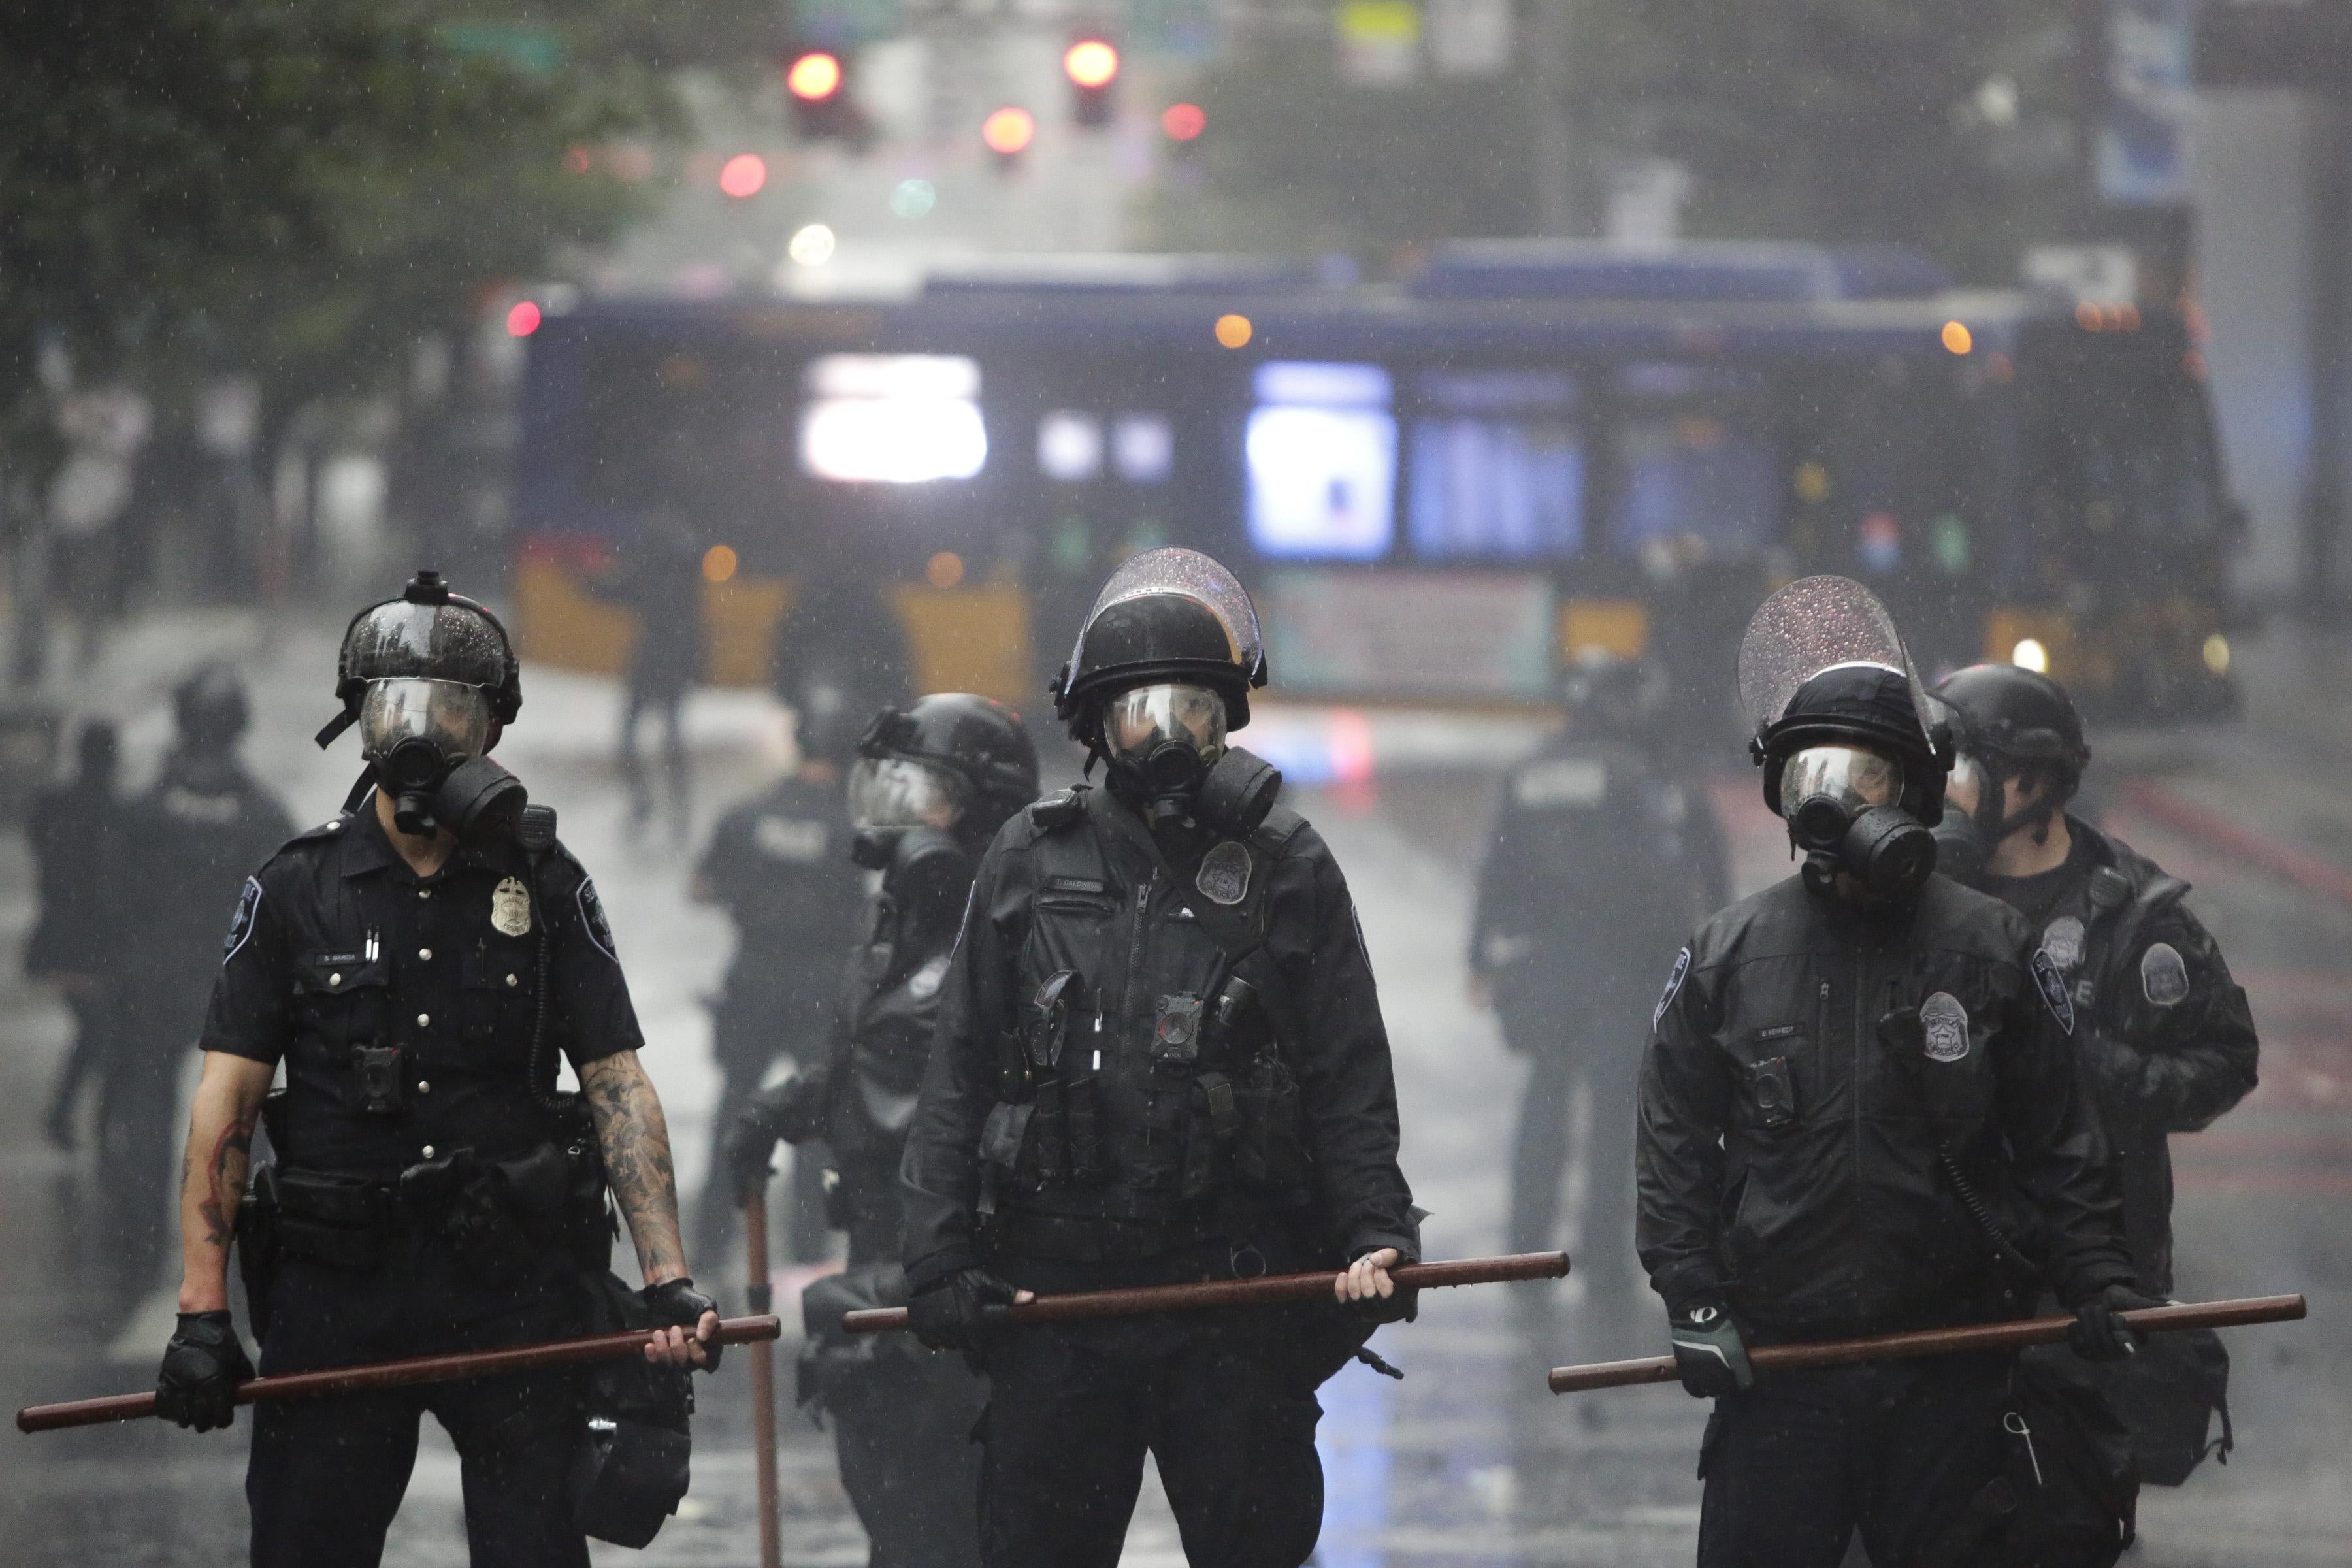 Police in gas masks stand in the street after protests in Seattle, Washington on May 30, 2020.